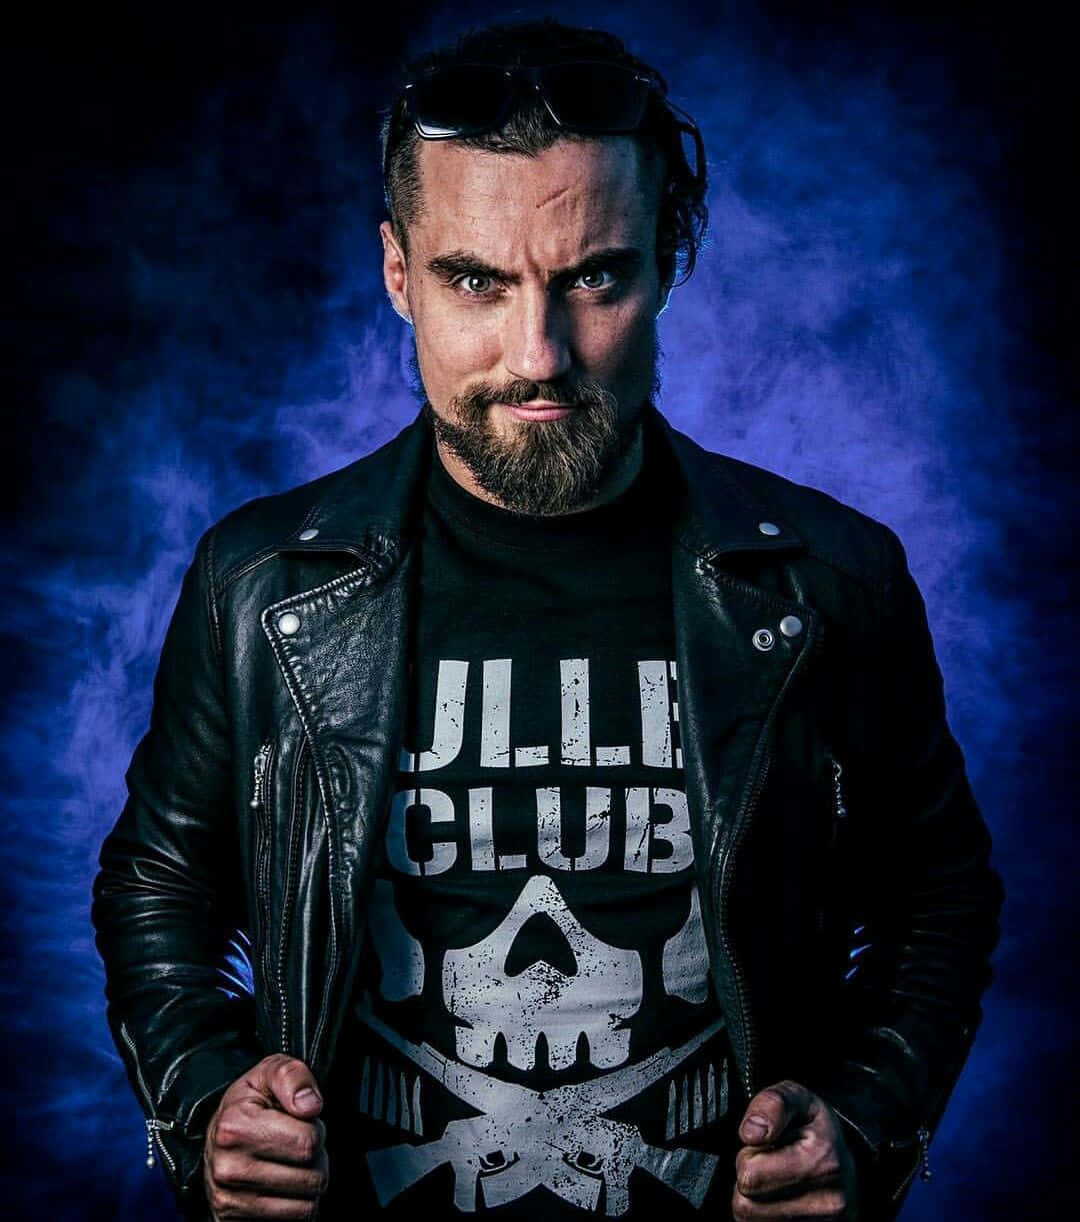 English Professional Wrestler Marty Scurll Bullet Club Wallpaper